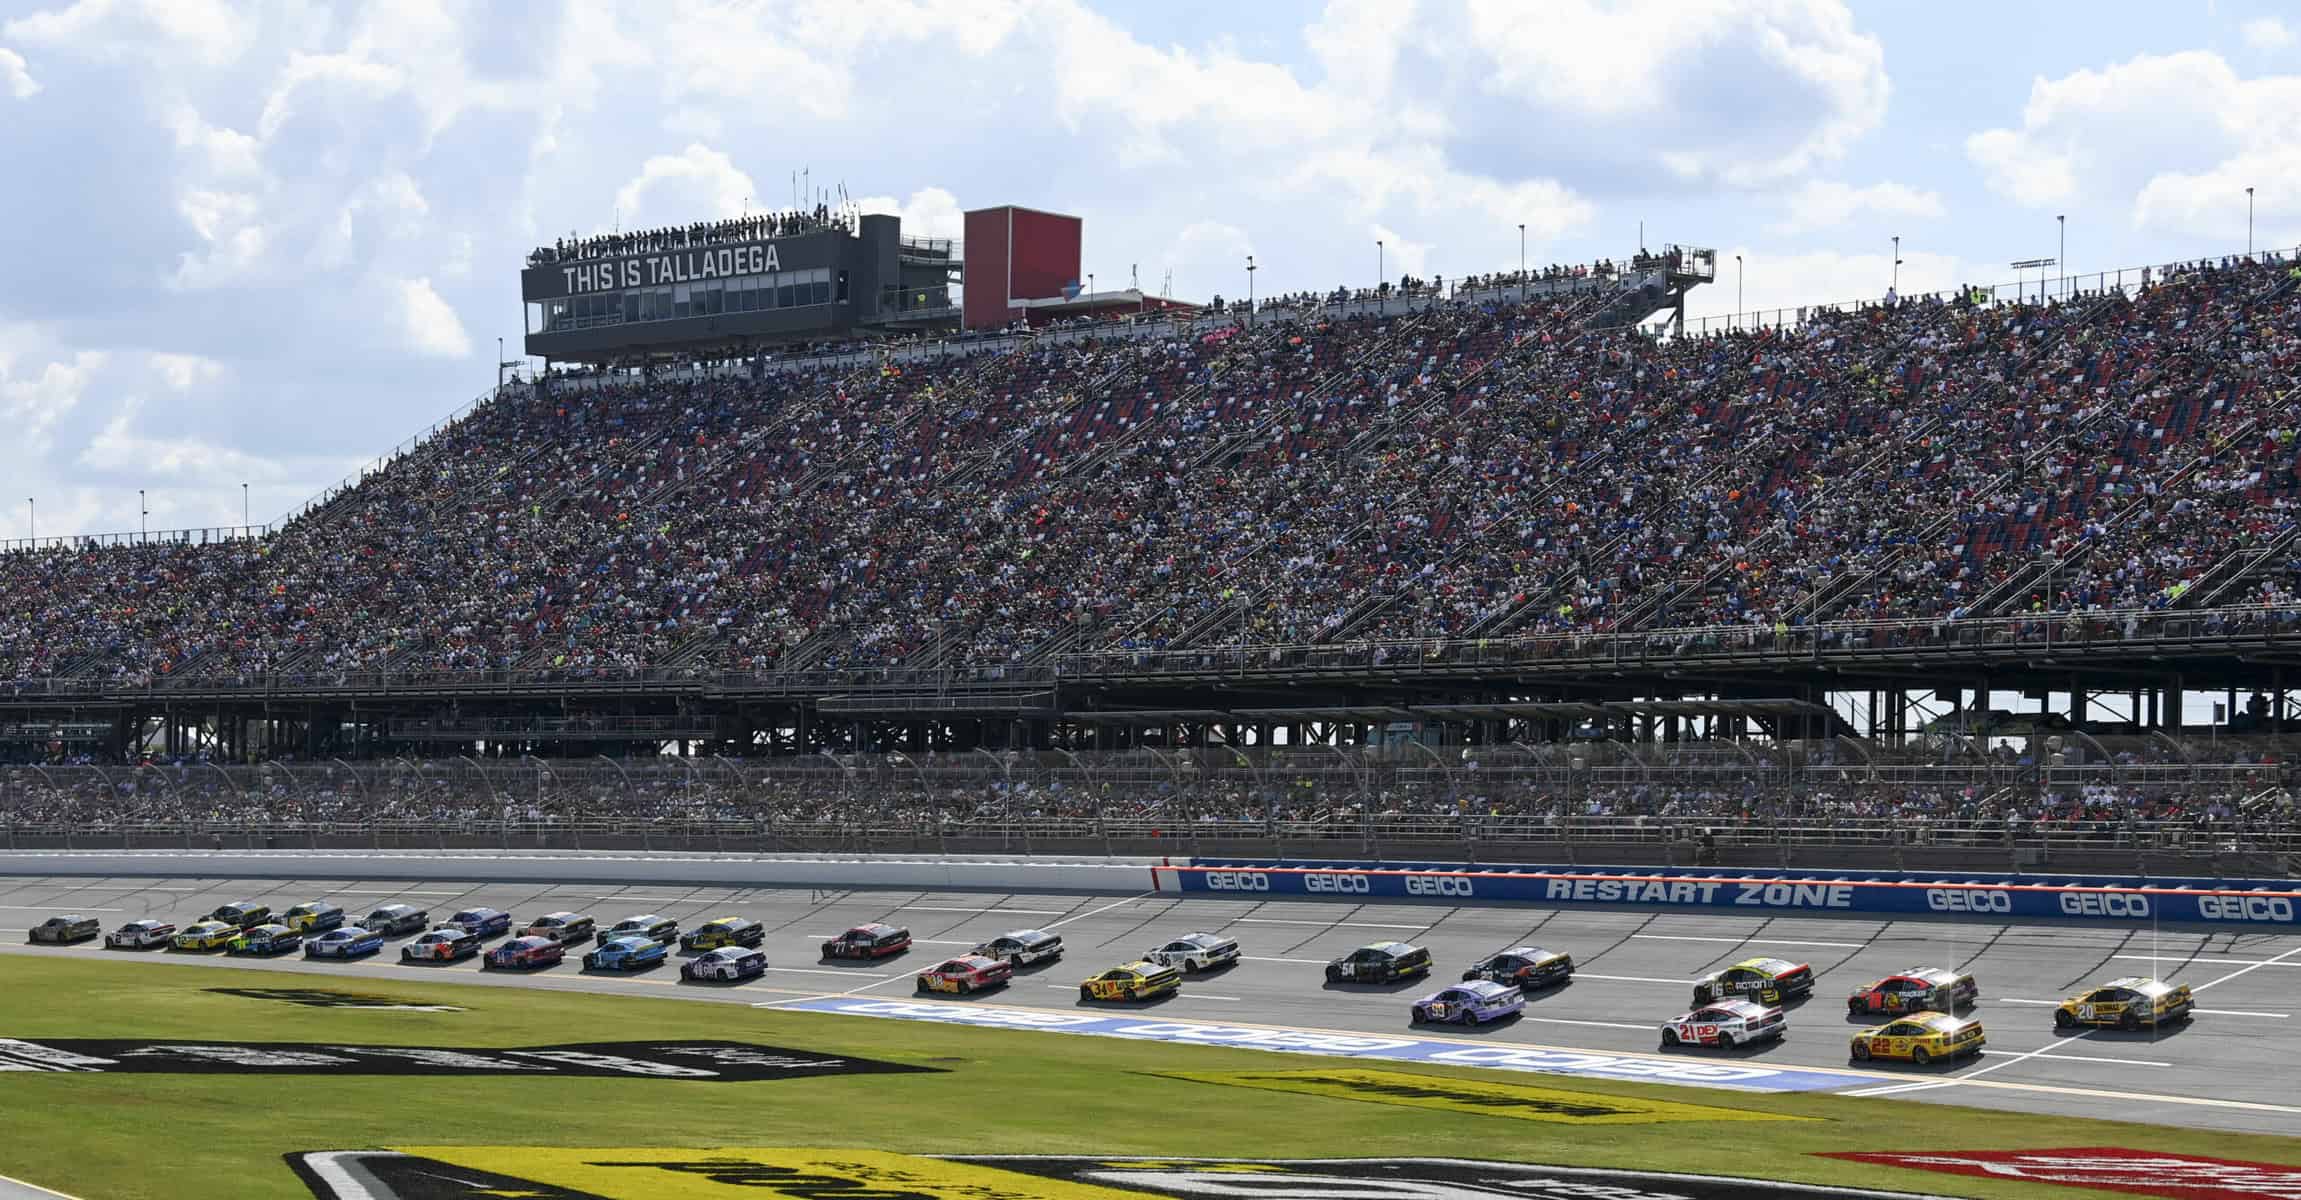 Let's dive into our NASCAR DFS picks to identify the top drivers for the GEICO 500 at Talladega in this pre-projections run...